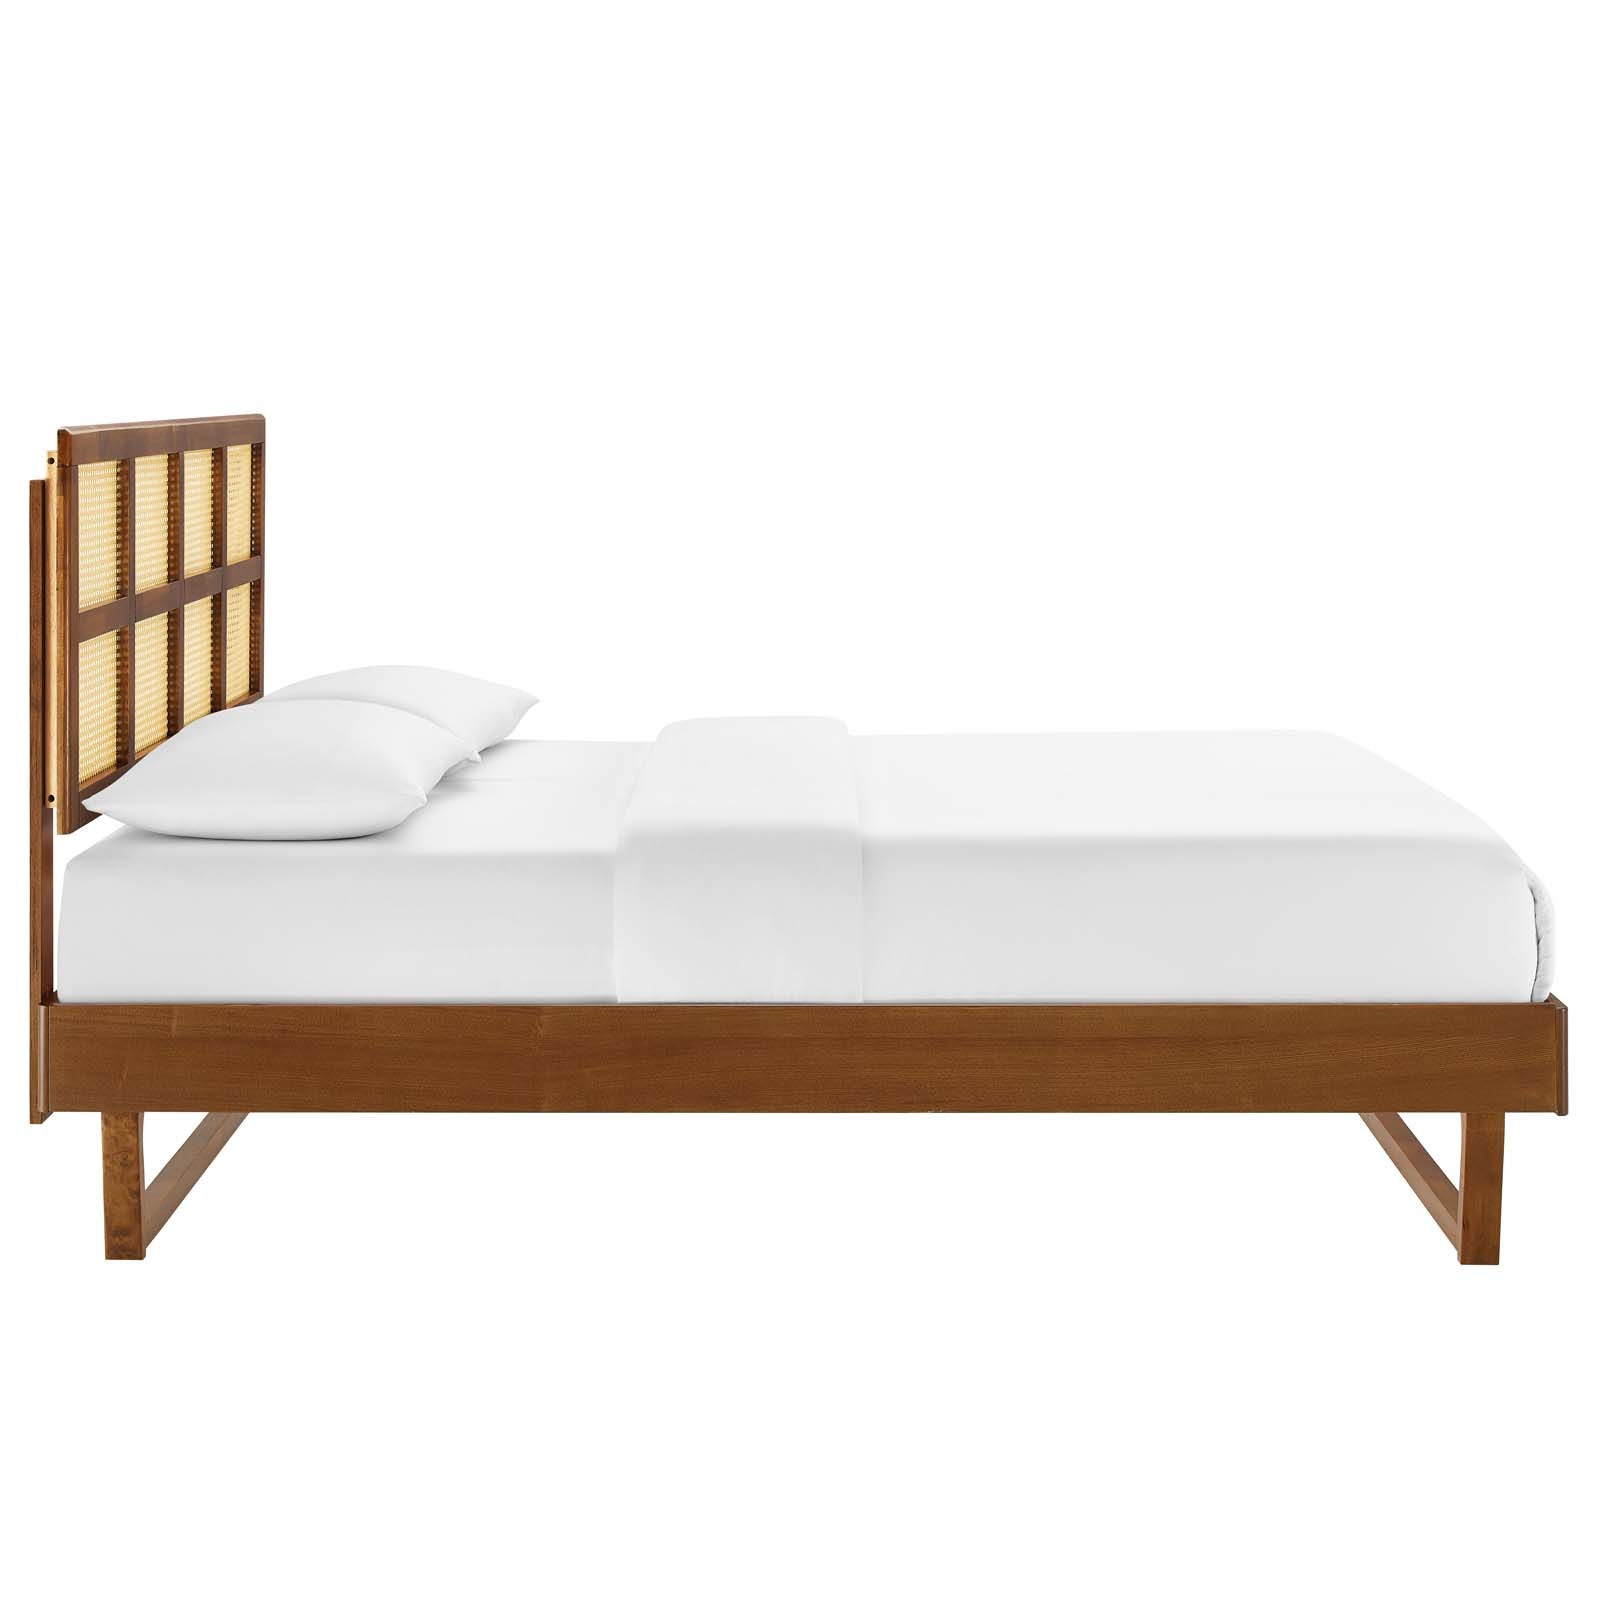 Sidney Cane And Wood King Platform Bed With Angular Legs, Walnut